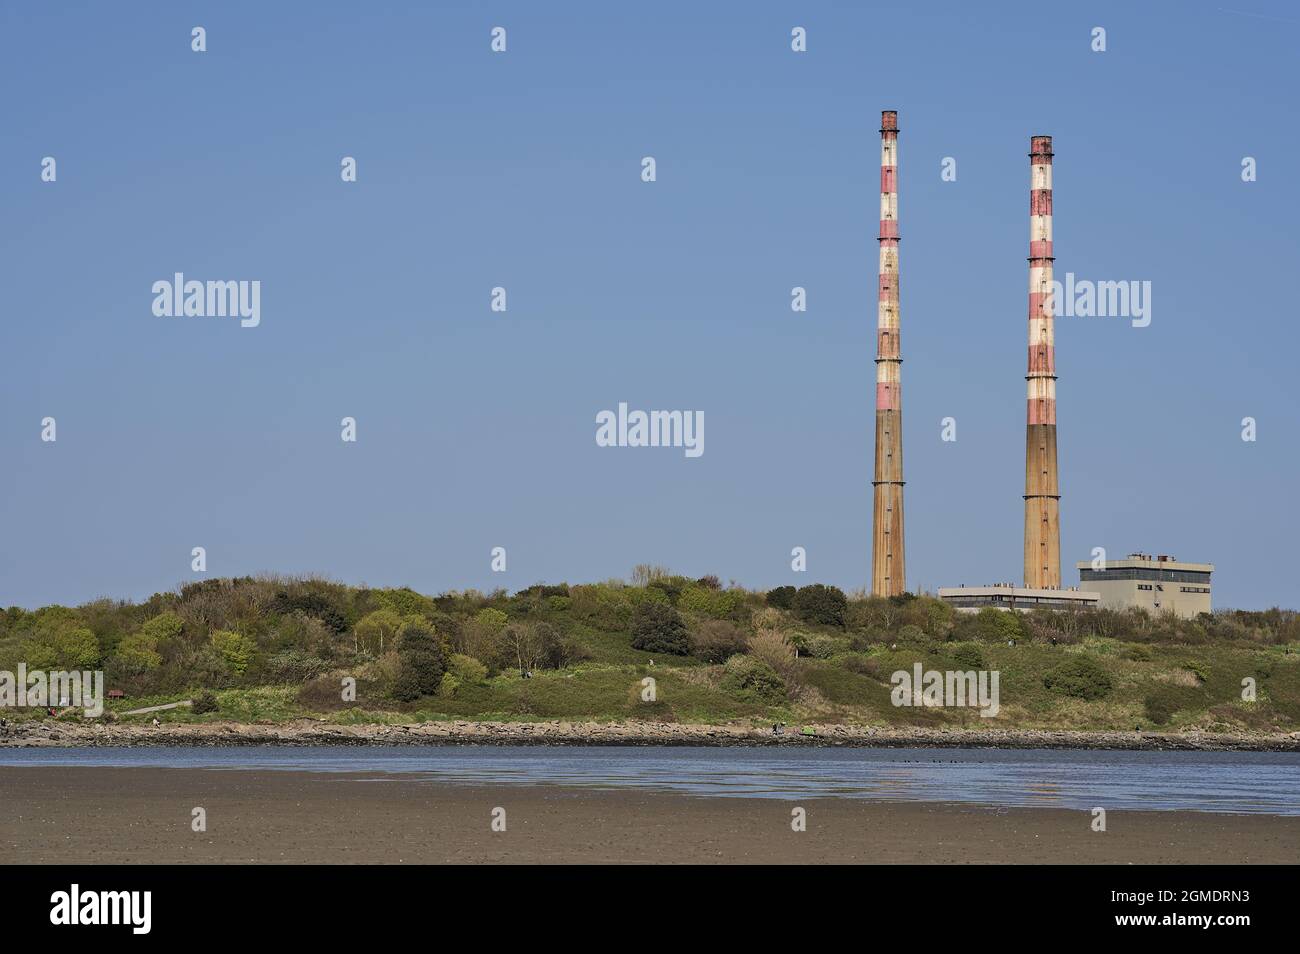 Beautiful closeup bright view of iconic Poolbeg CCGT station chimneys against clear blue sky seen from Sandymount Beach, Dublin, Ireland. Soft colors. Stock Photo